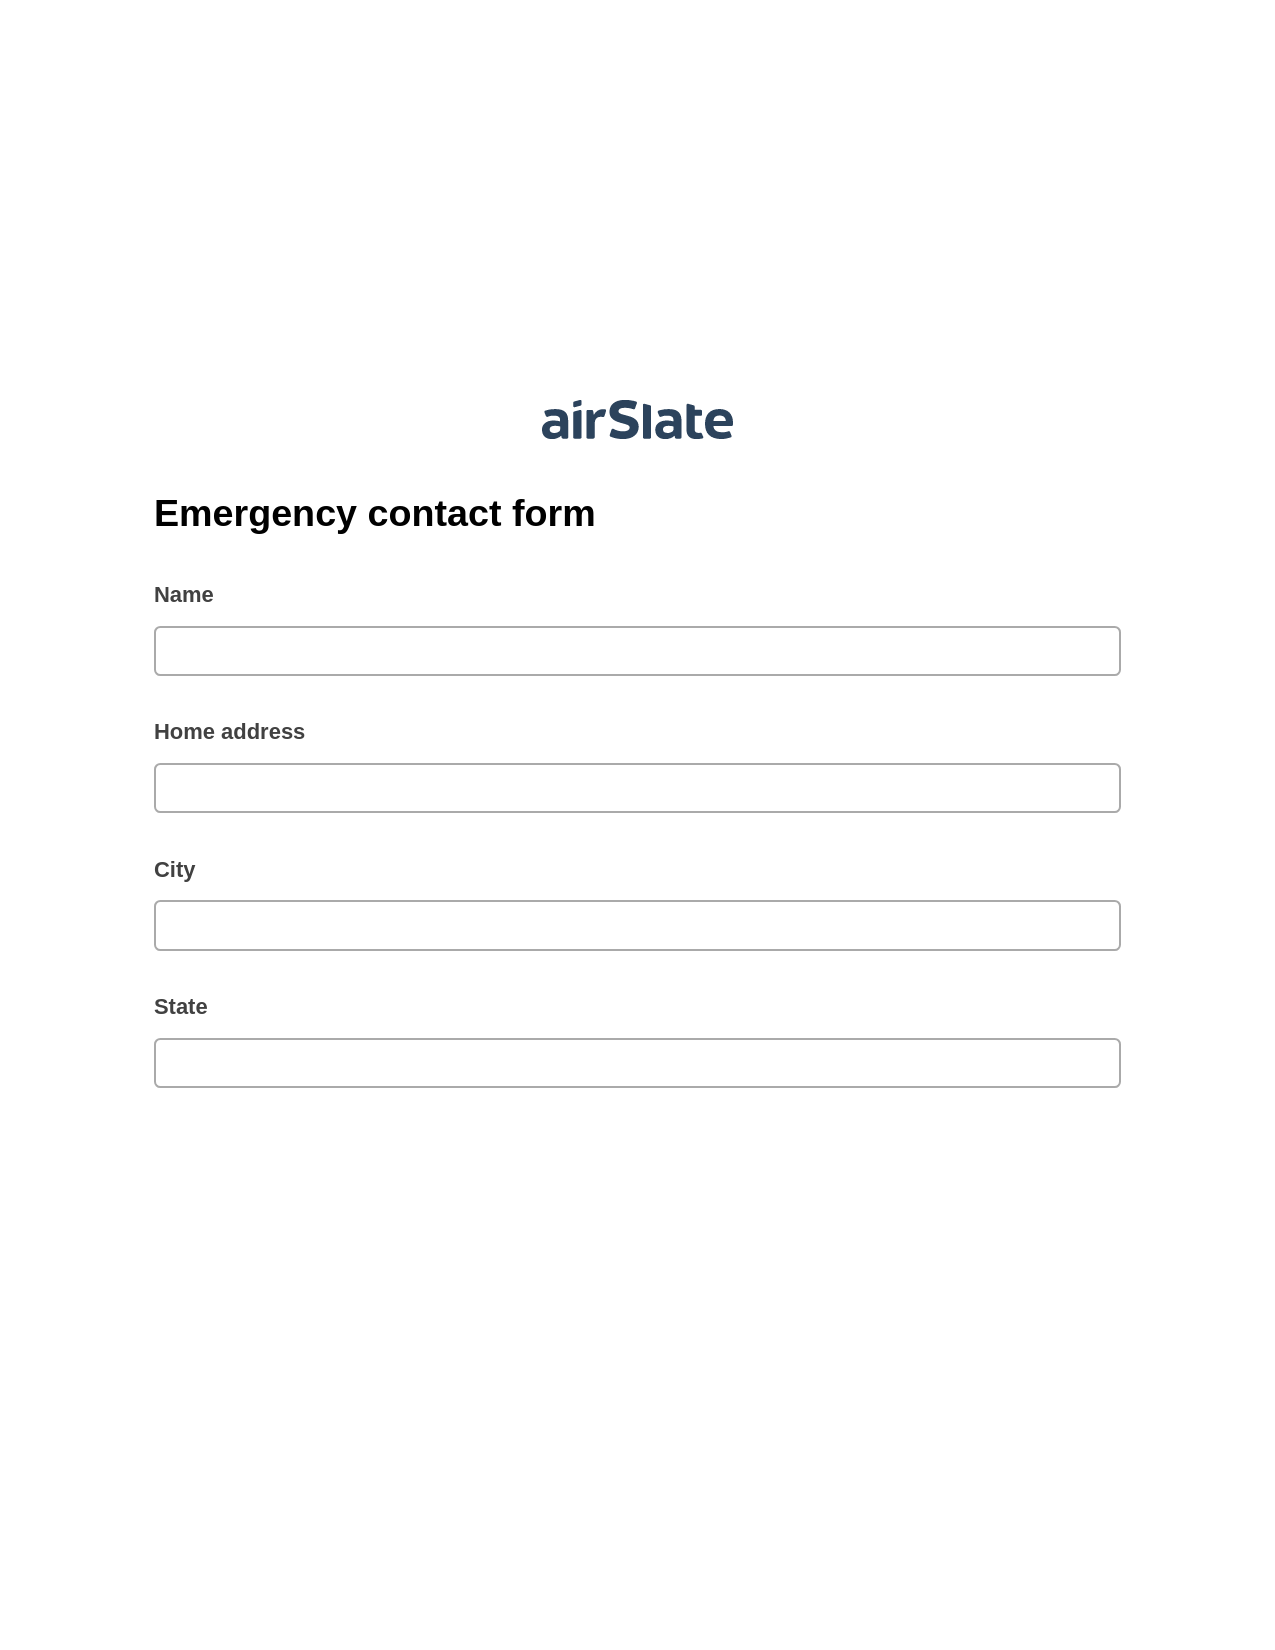 Multirole Emergency contact form Pre-fill Slate from MS Dynamics 365 Records Bot, Create Salesforce Record Bot, Export to Formstack Documents Bot